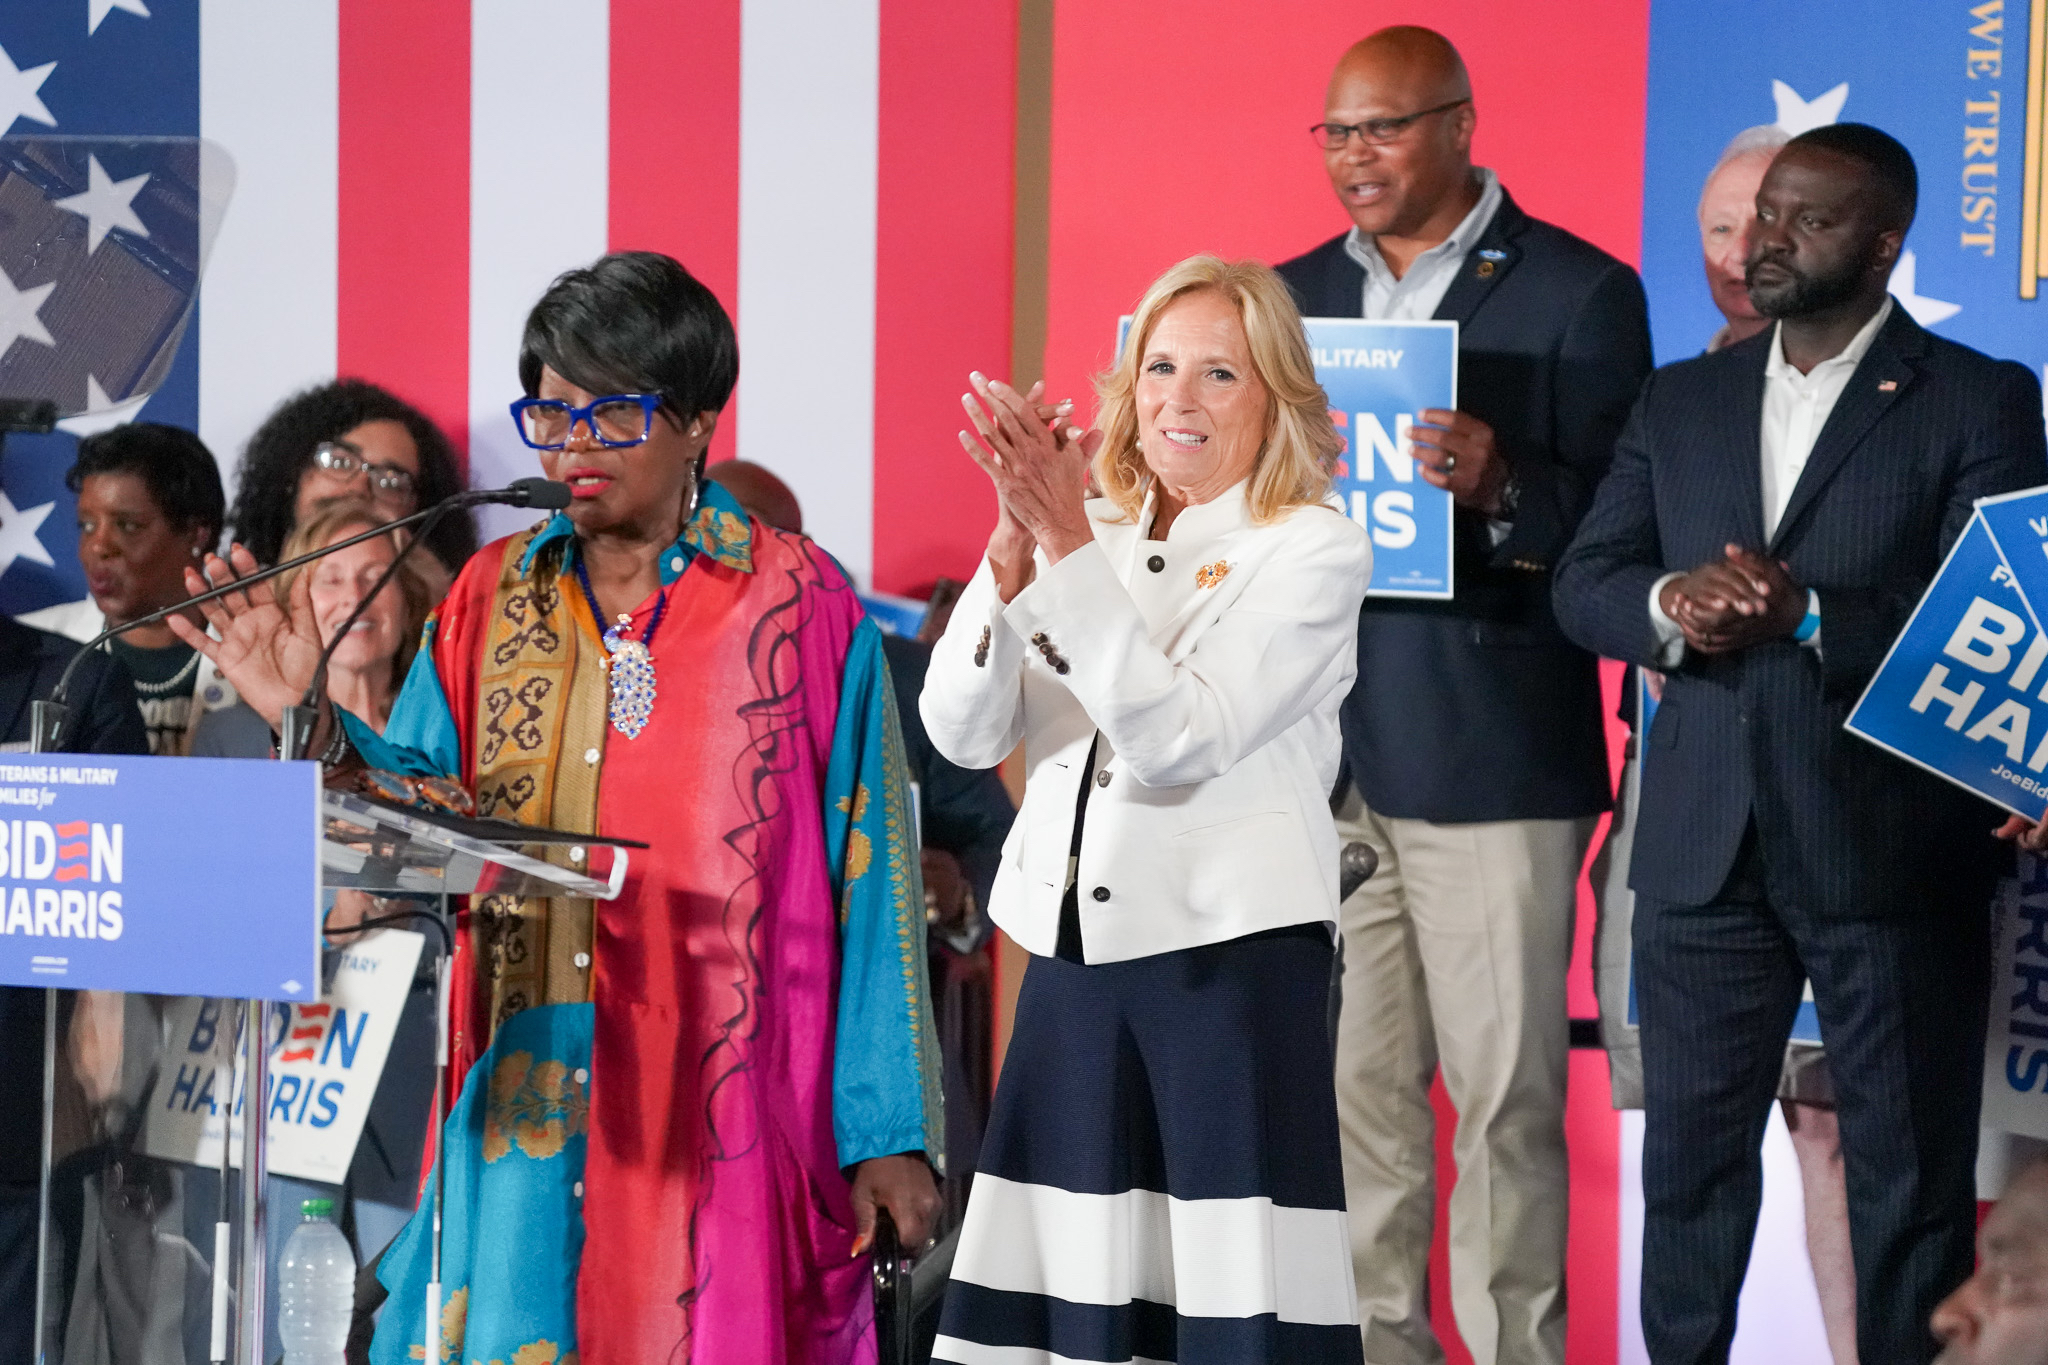 ‘He’s All In’: First Lady is in Georgia to support Biden-Harris campaign